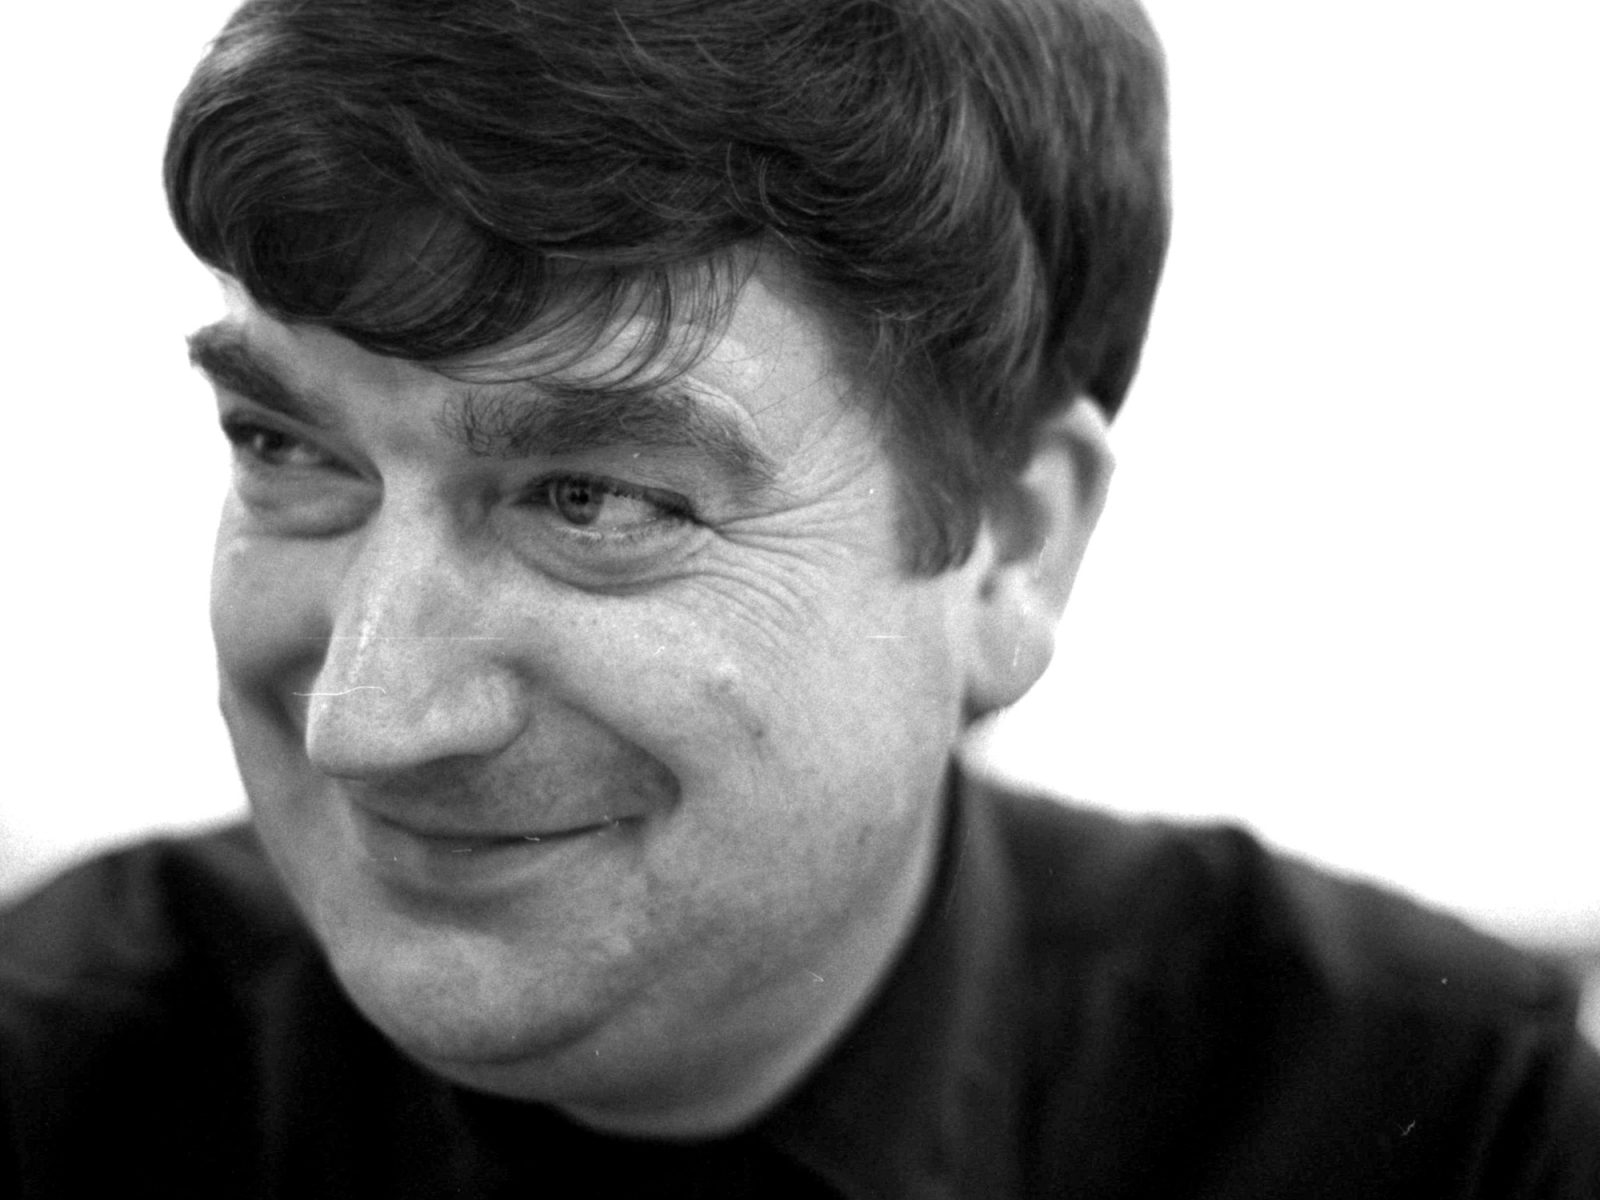 Dark-haired smiling man in a black polo shirt looking slightly to the right, Eric Andersson.